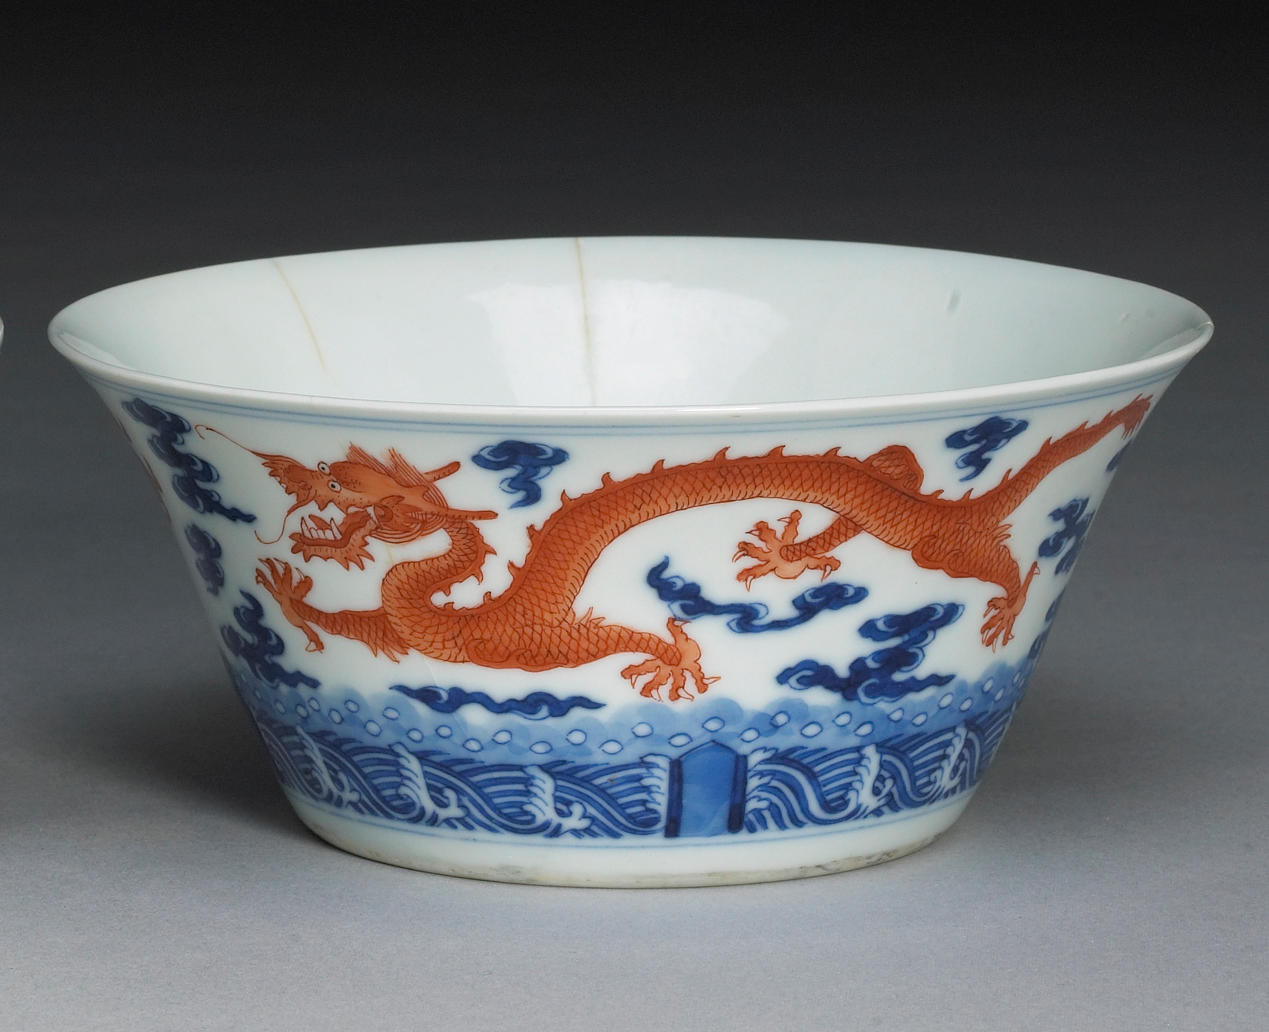 An underglaze blue and iron red enameled dragon bowl